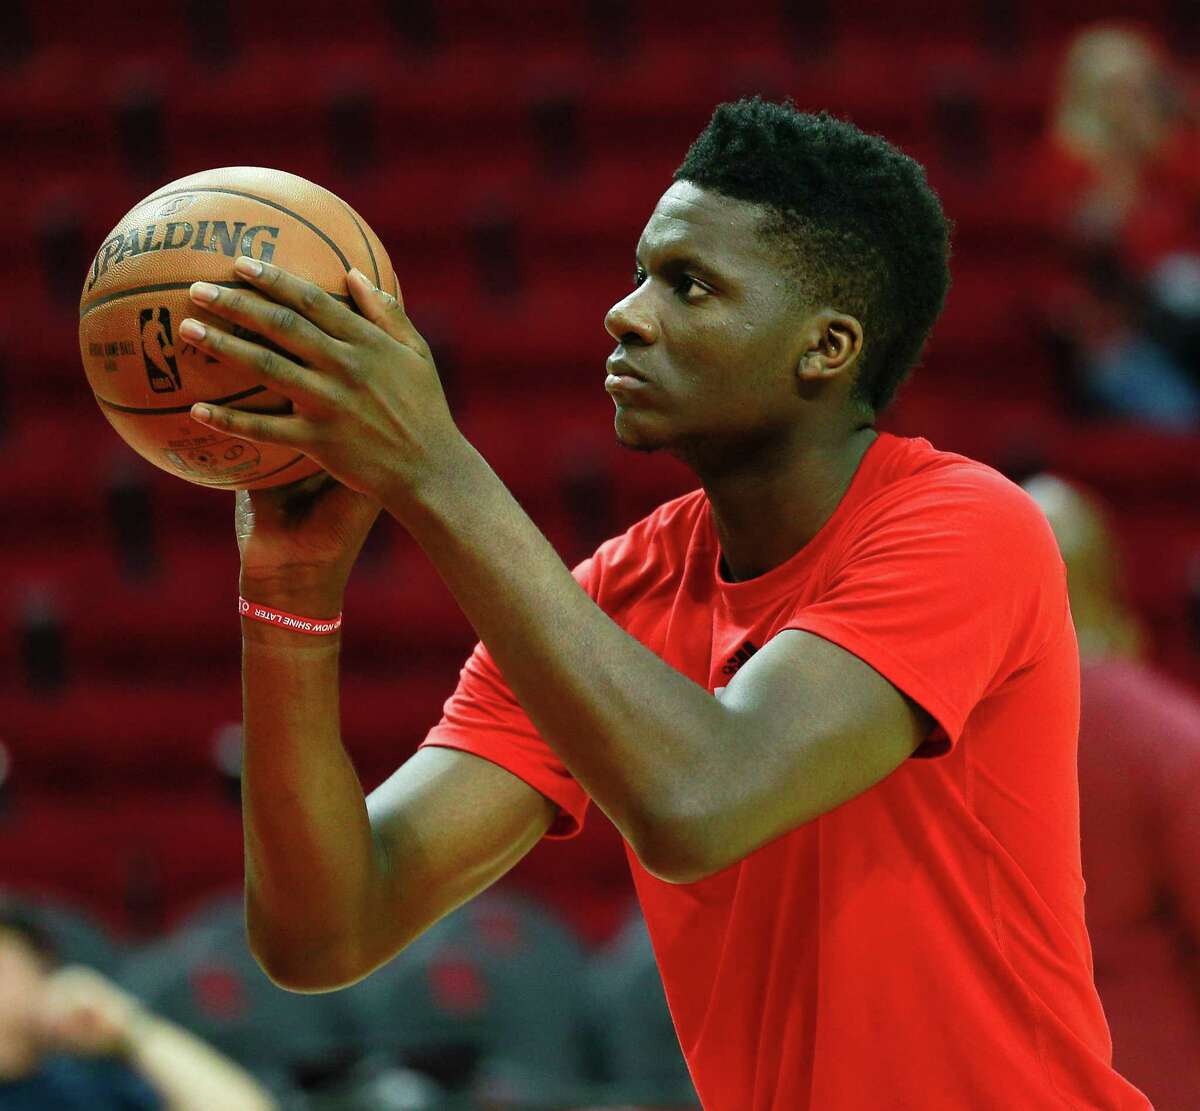 HOUSTON, TX - DECEMBER 07: Clint Capela #15 of the Houston Rockets warms up before playing the Los Angeles Lakers at Toyota Center on December 7, 2016 in Houston, Texas. NOTE TO USER: User expressly acknowledges and agrees that, by downloading and/or using this photograph, user is consenting to the terms and conditions of the Getty Images License Agreement. (Photo by Bob Levey/Getty Images)